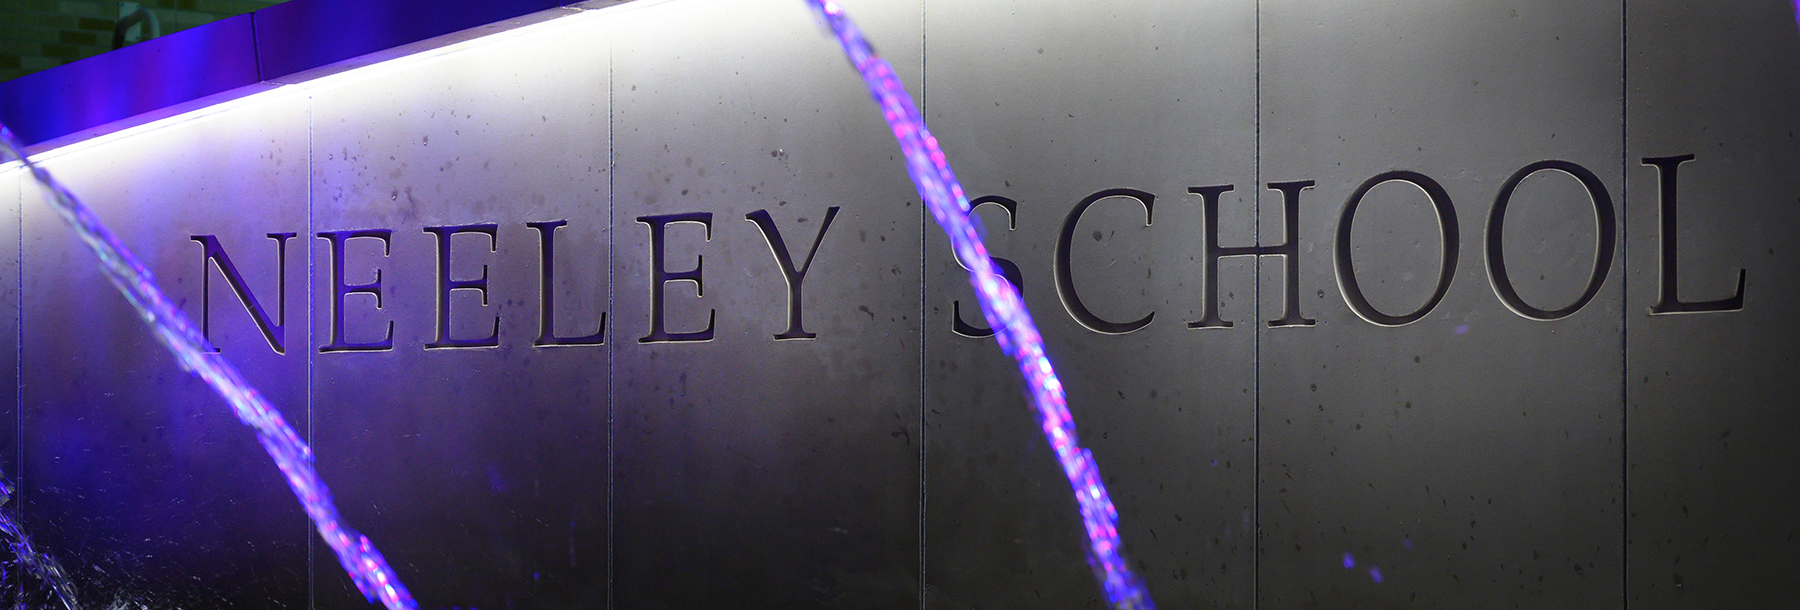 Section Image: Neeley fountain at night with purple lights. 